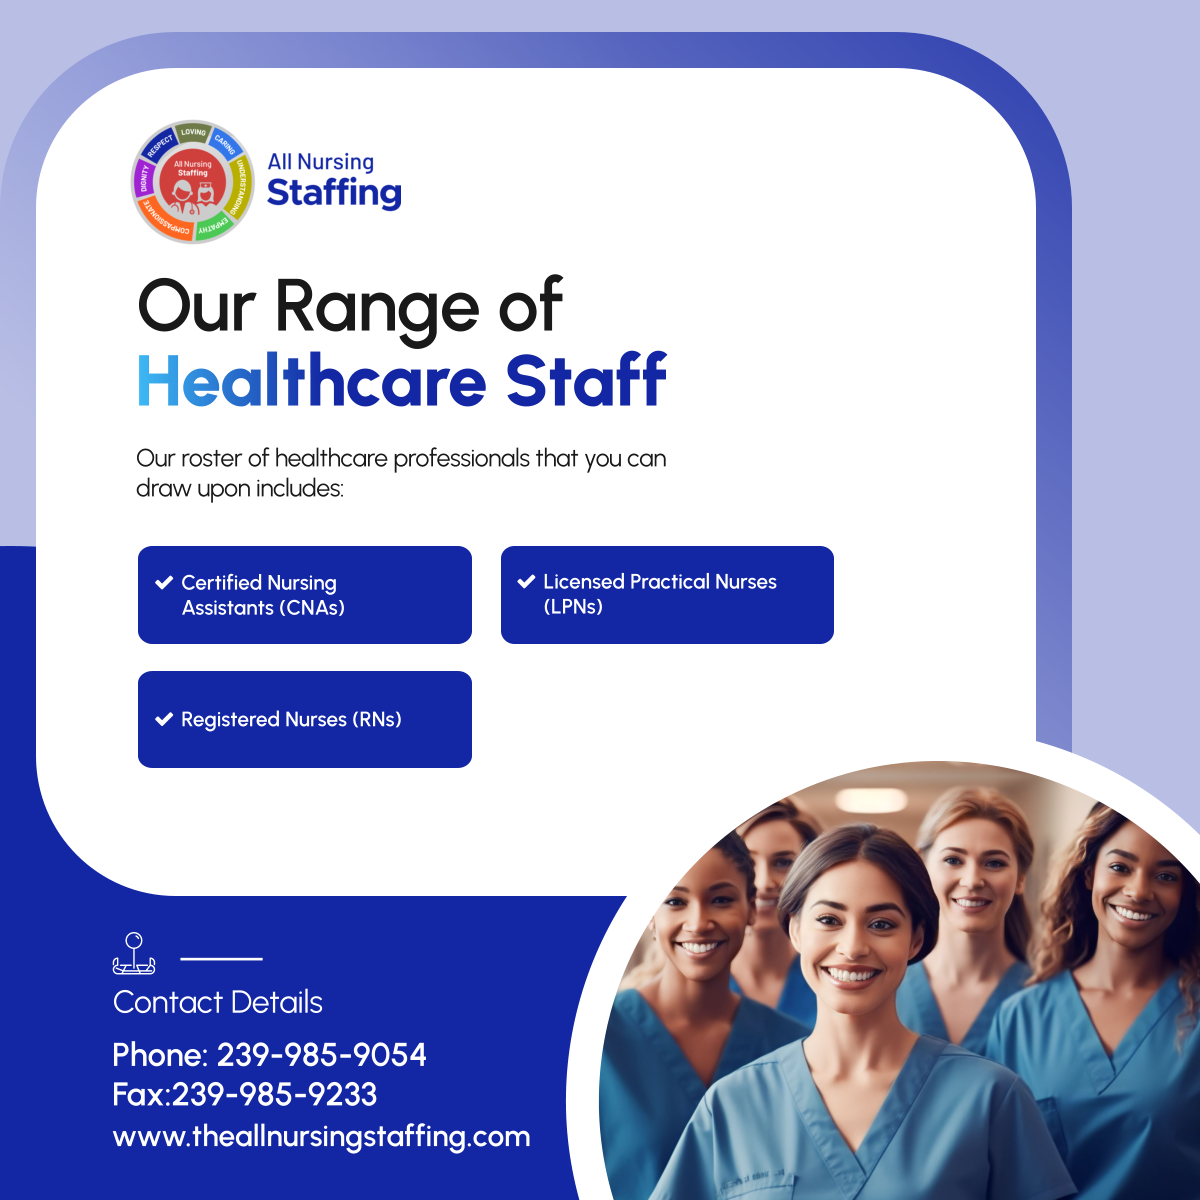 From specialized therapists to diagnostic experts, our pool of allied health professionals in Florida is ready to fill the gaps in your healthcare teams...

Read more:
facebook.com/permalink.php?…

#FortMyersFlorida #MedicalStaffing #HealthcareStaff